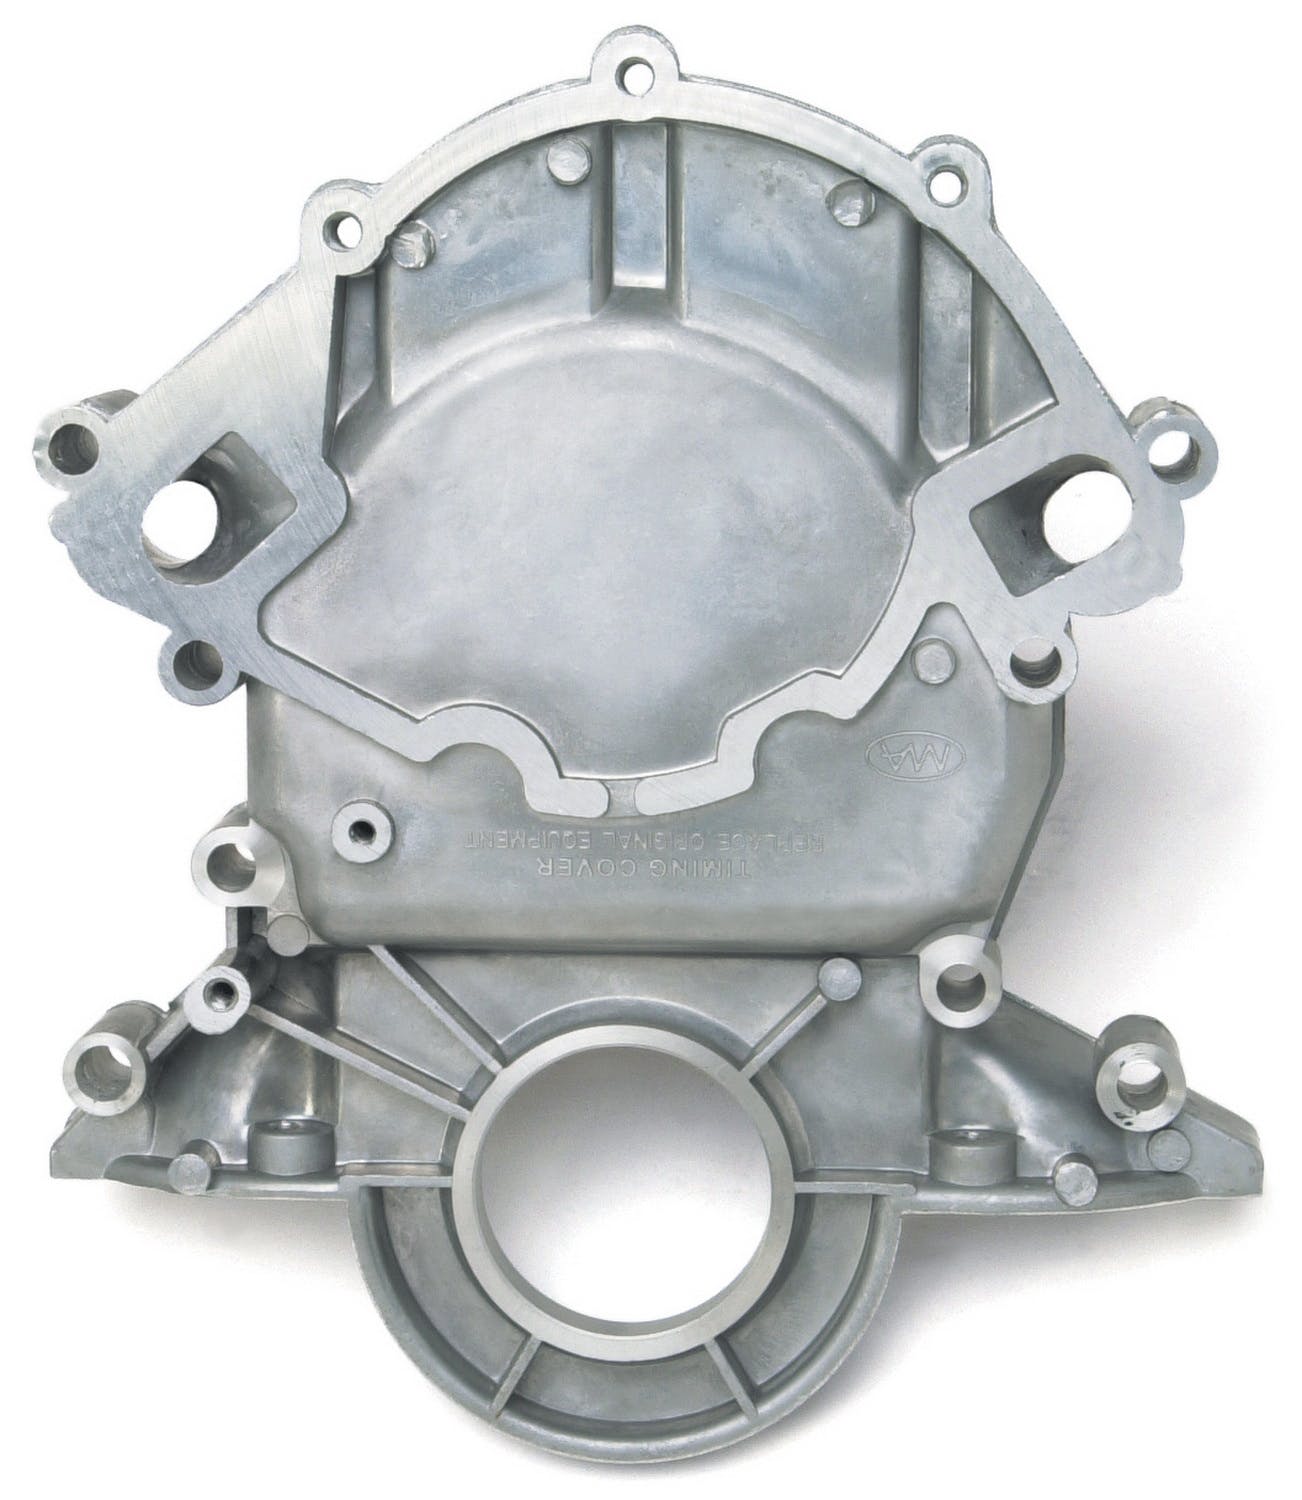 Edelbrock 4251 SBF TIMING COVER, 86-93 5.0L and 88-LATER 351W ENGINES